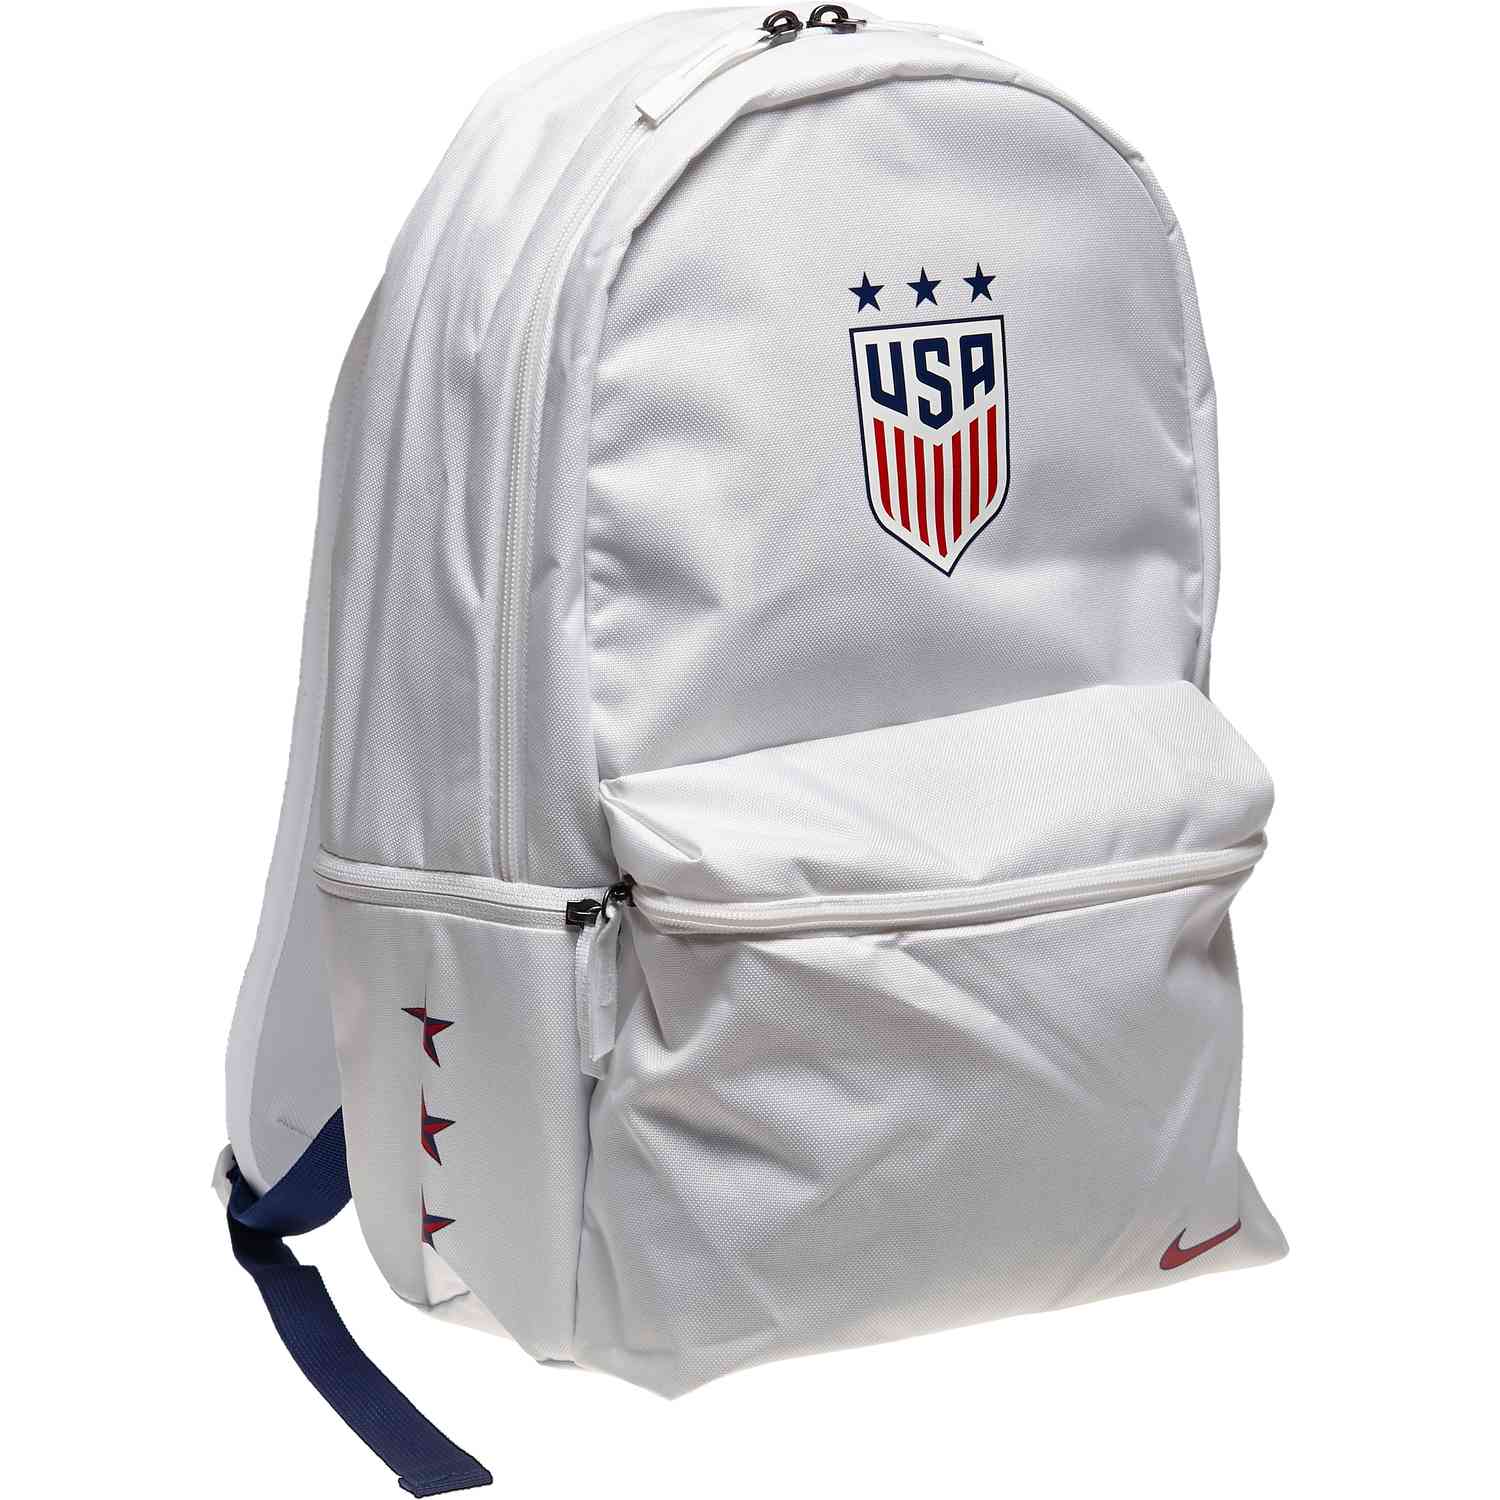 what backpack are made in the usa